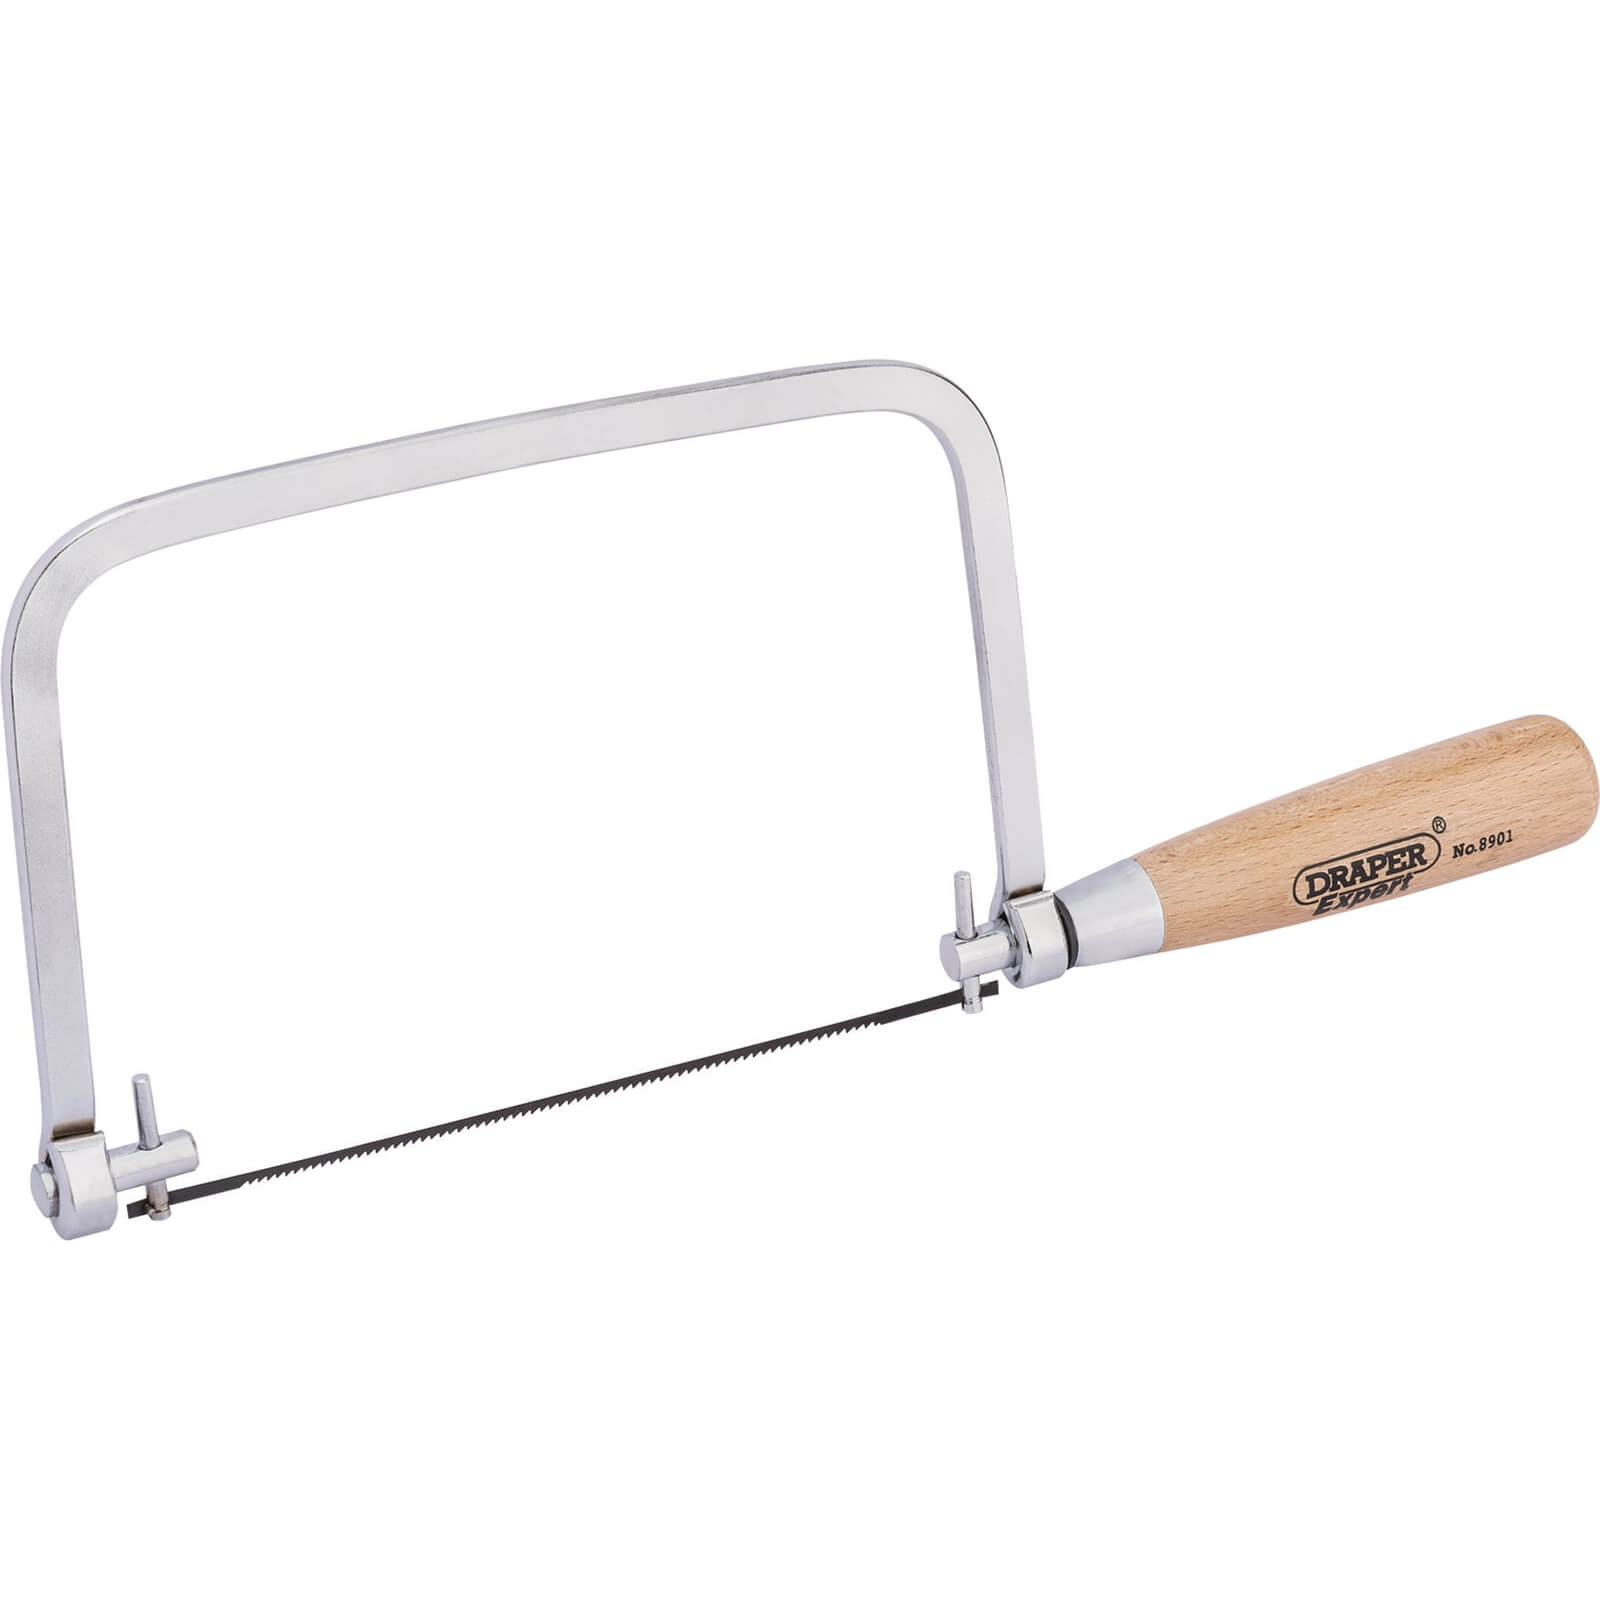 Image of Draper Expert Coping Saw